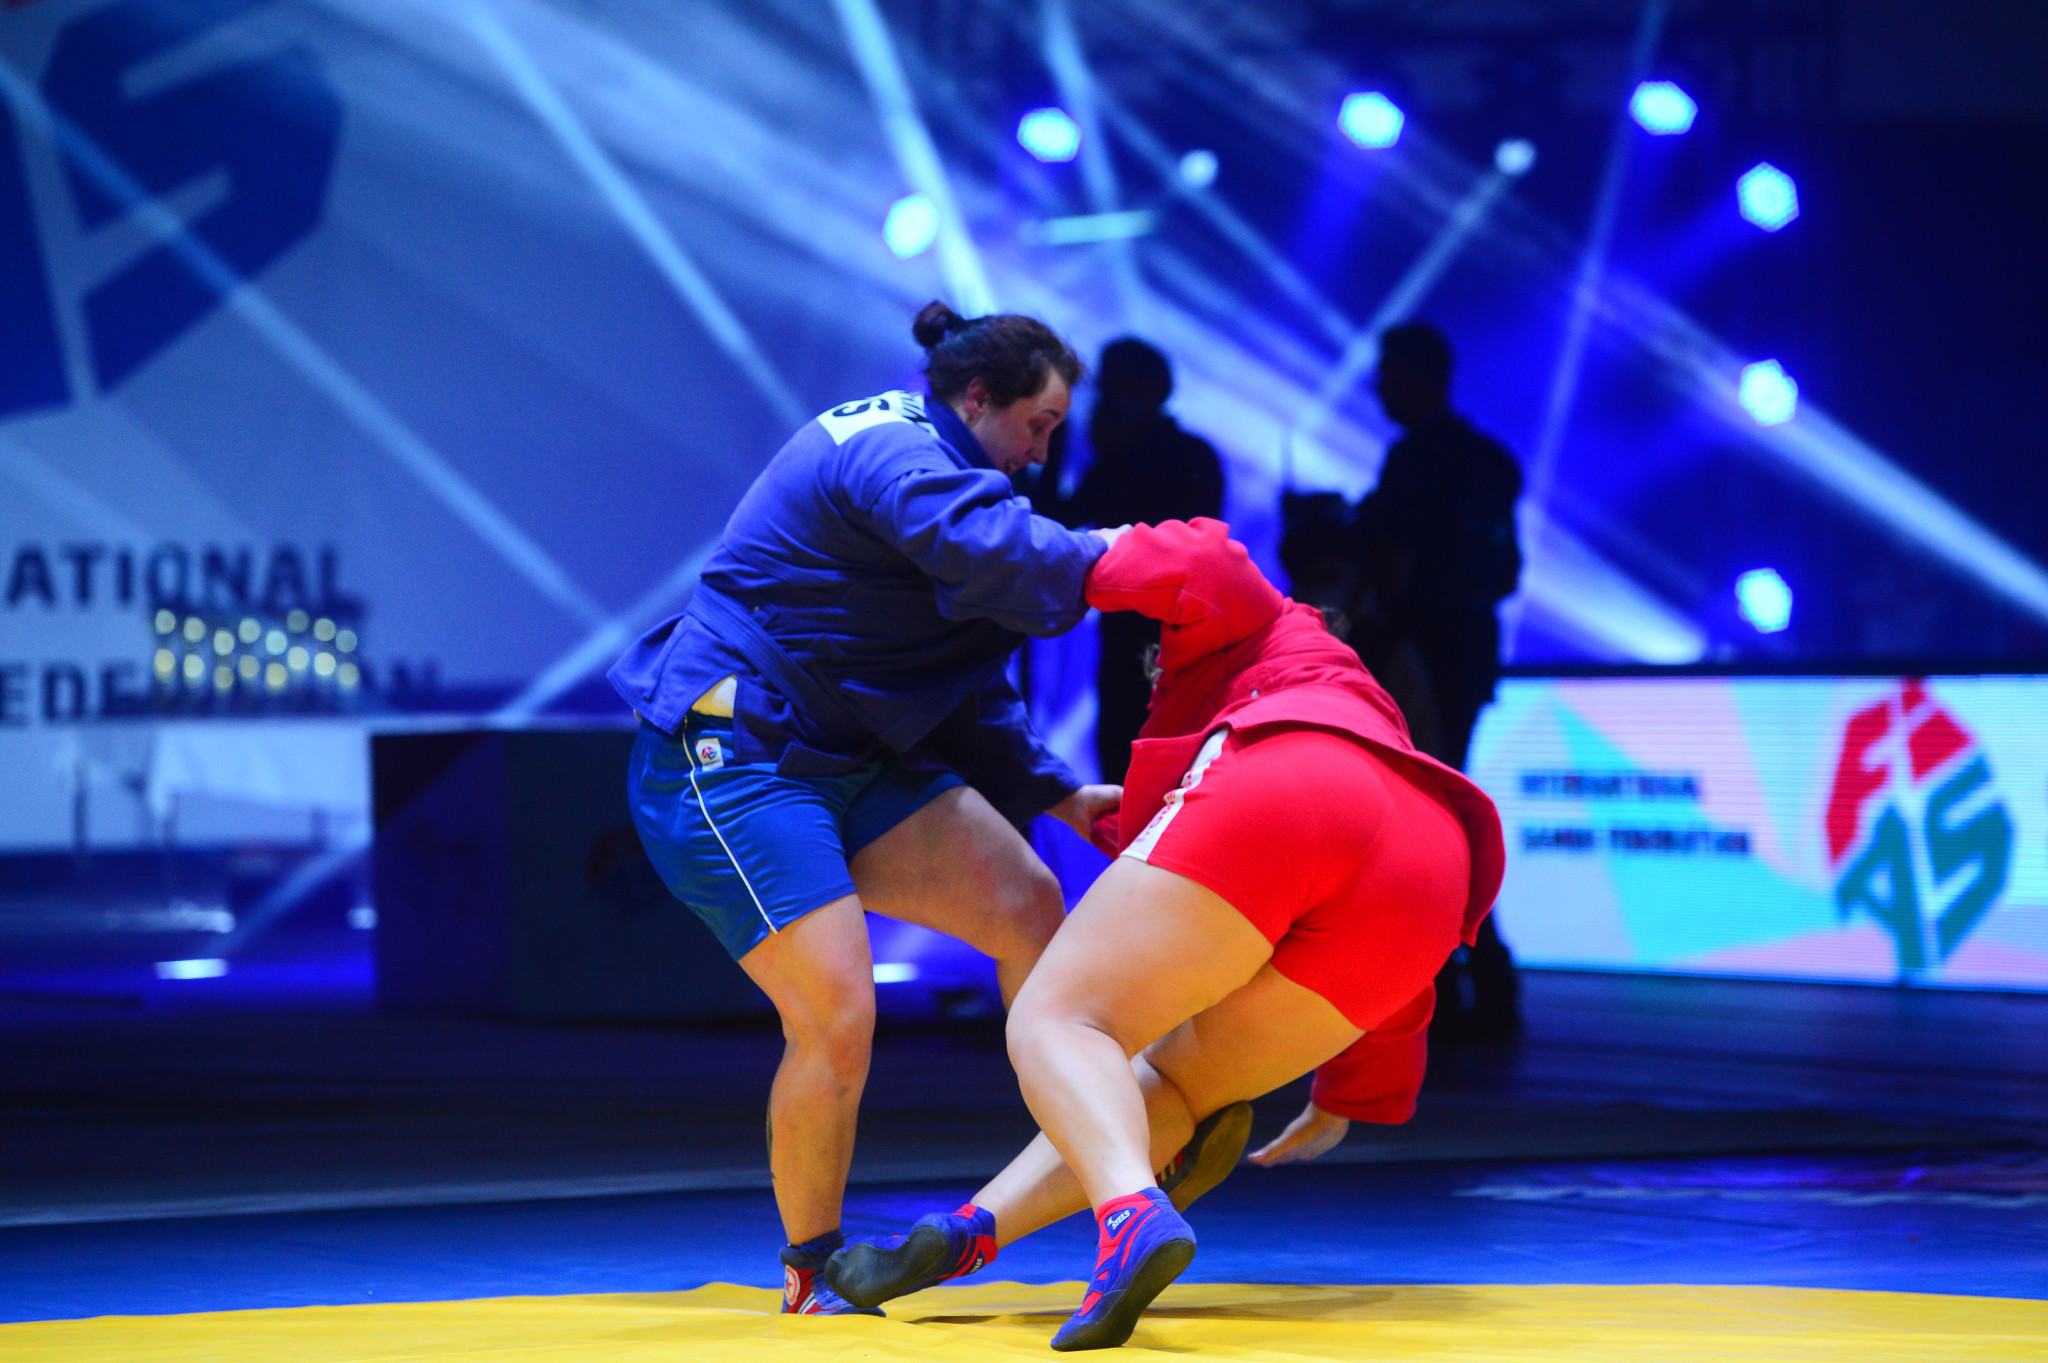 Olga Artoshina, in blue, was a clear winner in the women's over-80kg final to earn another Russian gold medal ©FIAS